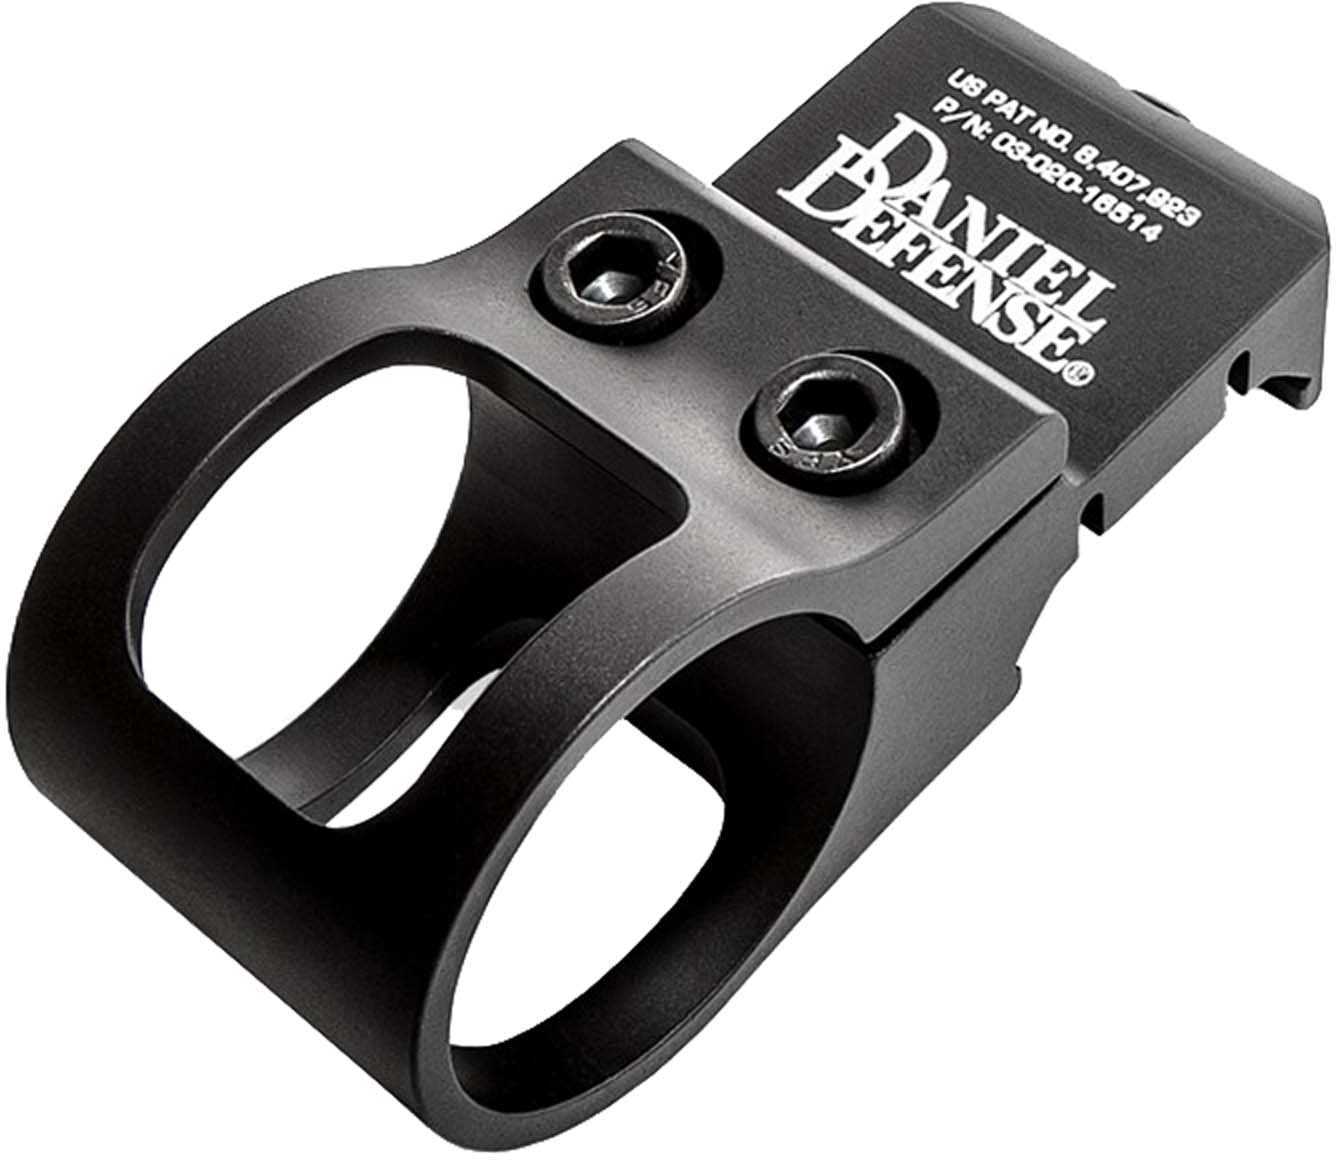 Daniel Defense Offset Flashlight Mount Use in conjunction with a vertical foregrip - User's thumb has quick & easy DD-6001